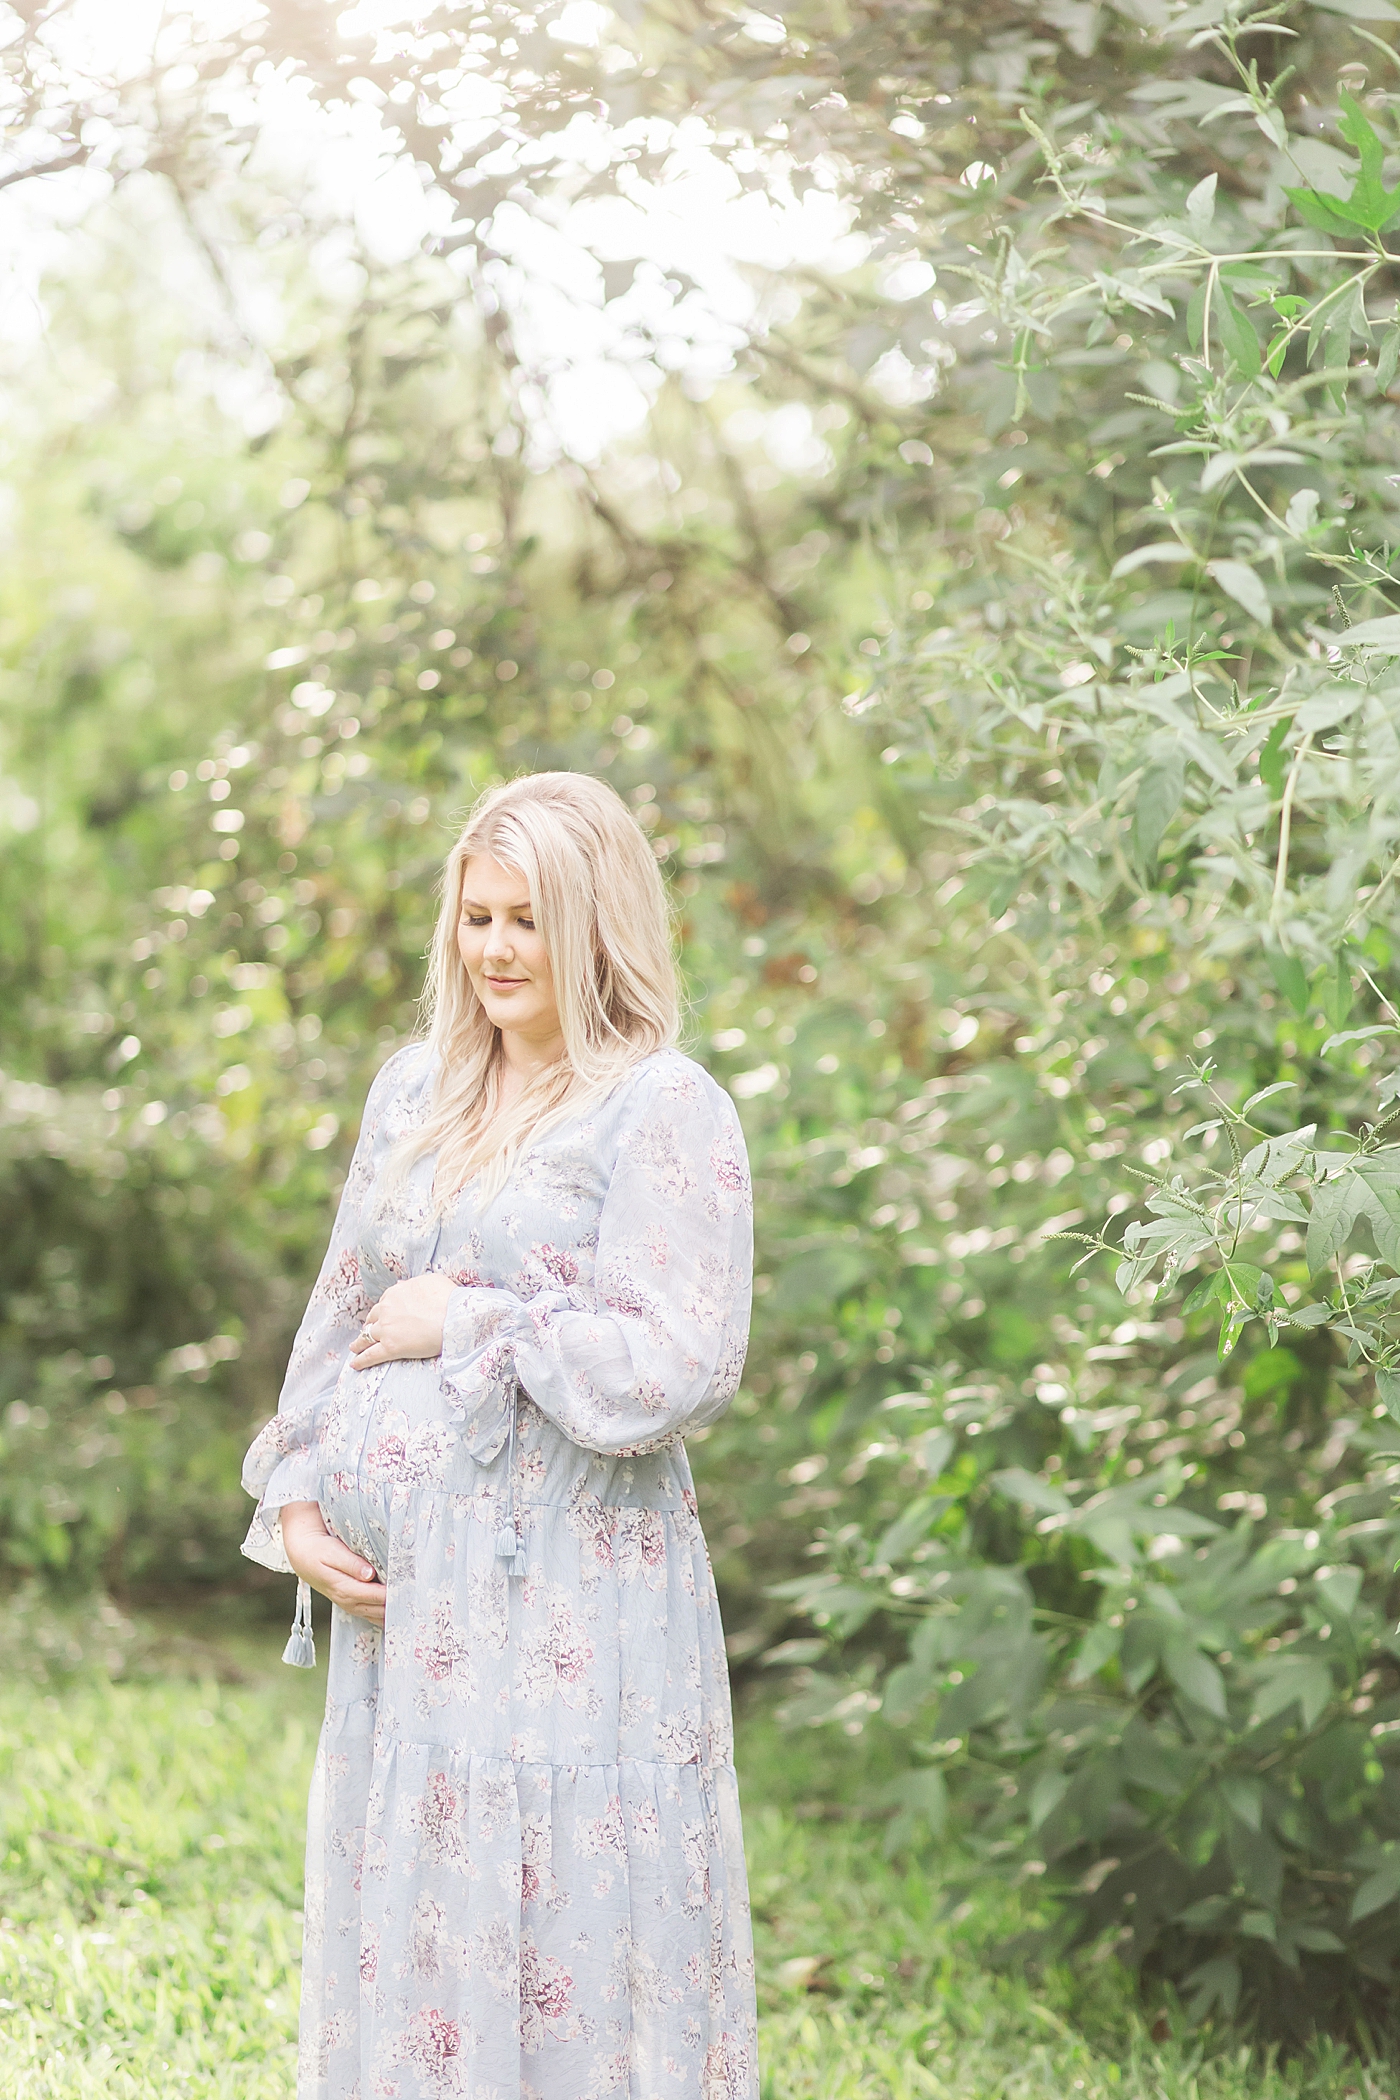 Mom wearing blue floral dress for maternity photoshoot. Photo by Fresh Light Photography.